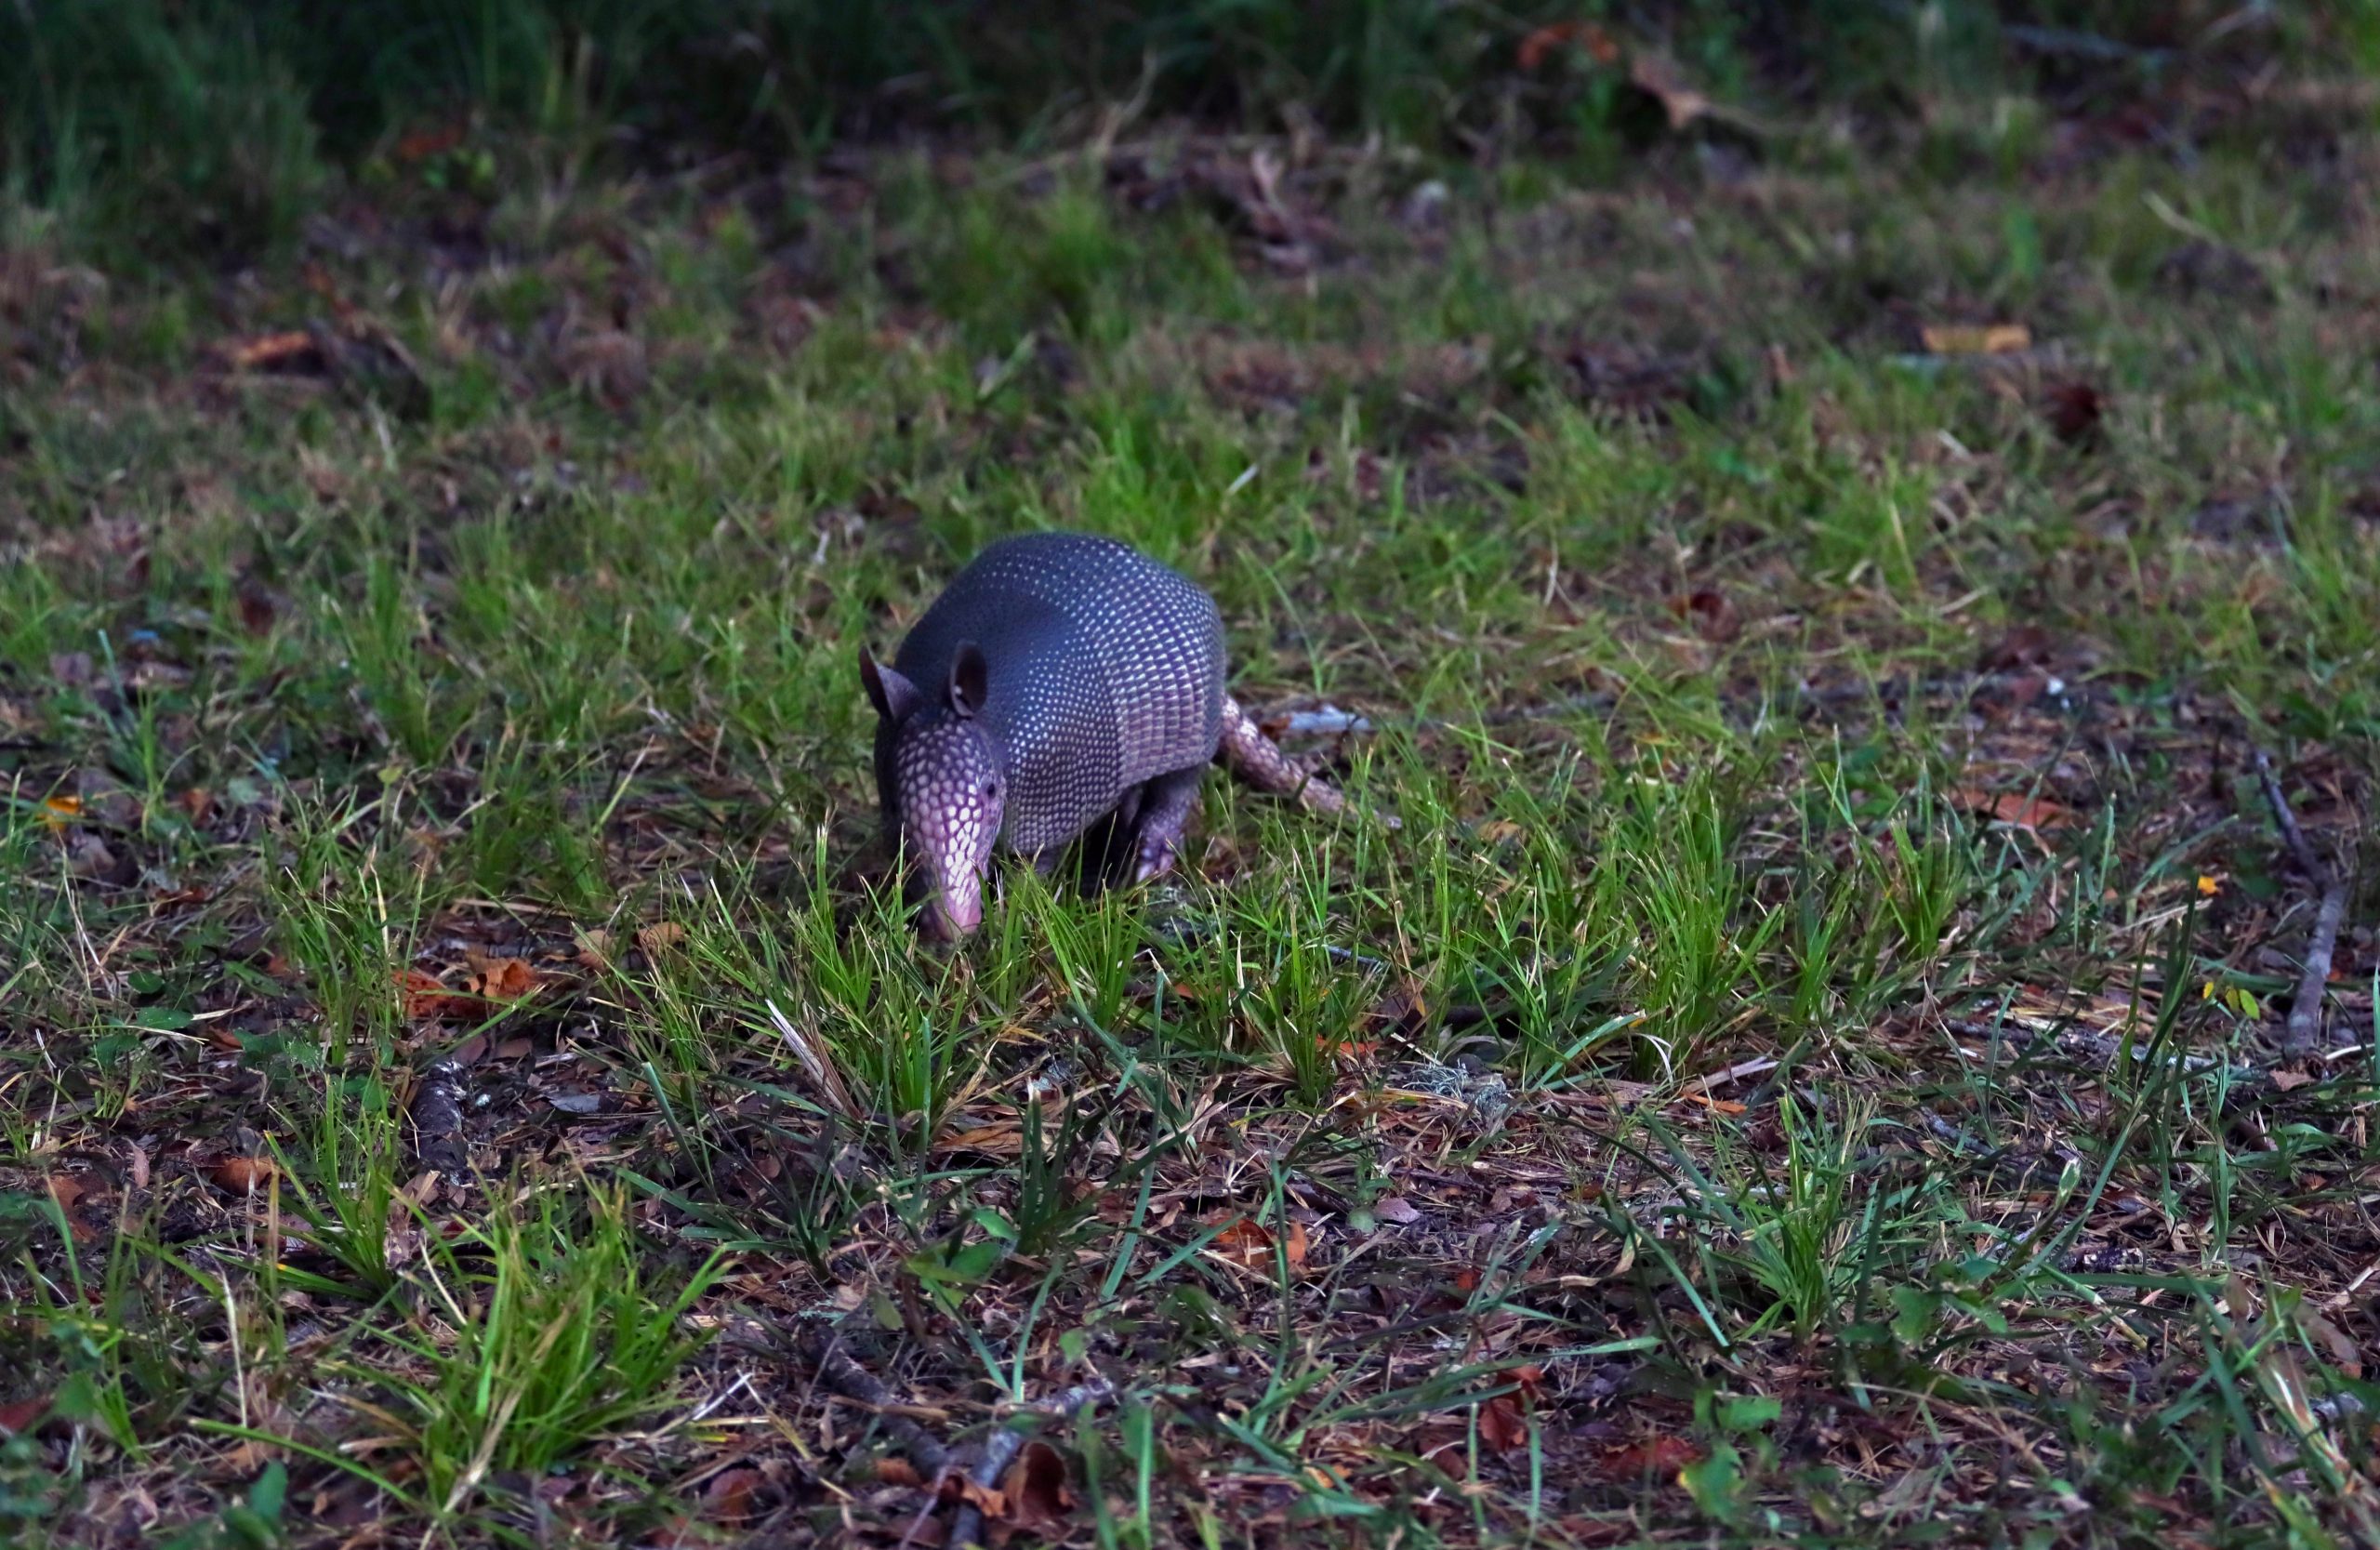 PHOTO: Armadillo in grass. Photo by The Signal reporter Xavier Munoz.